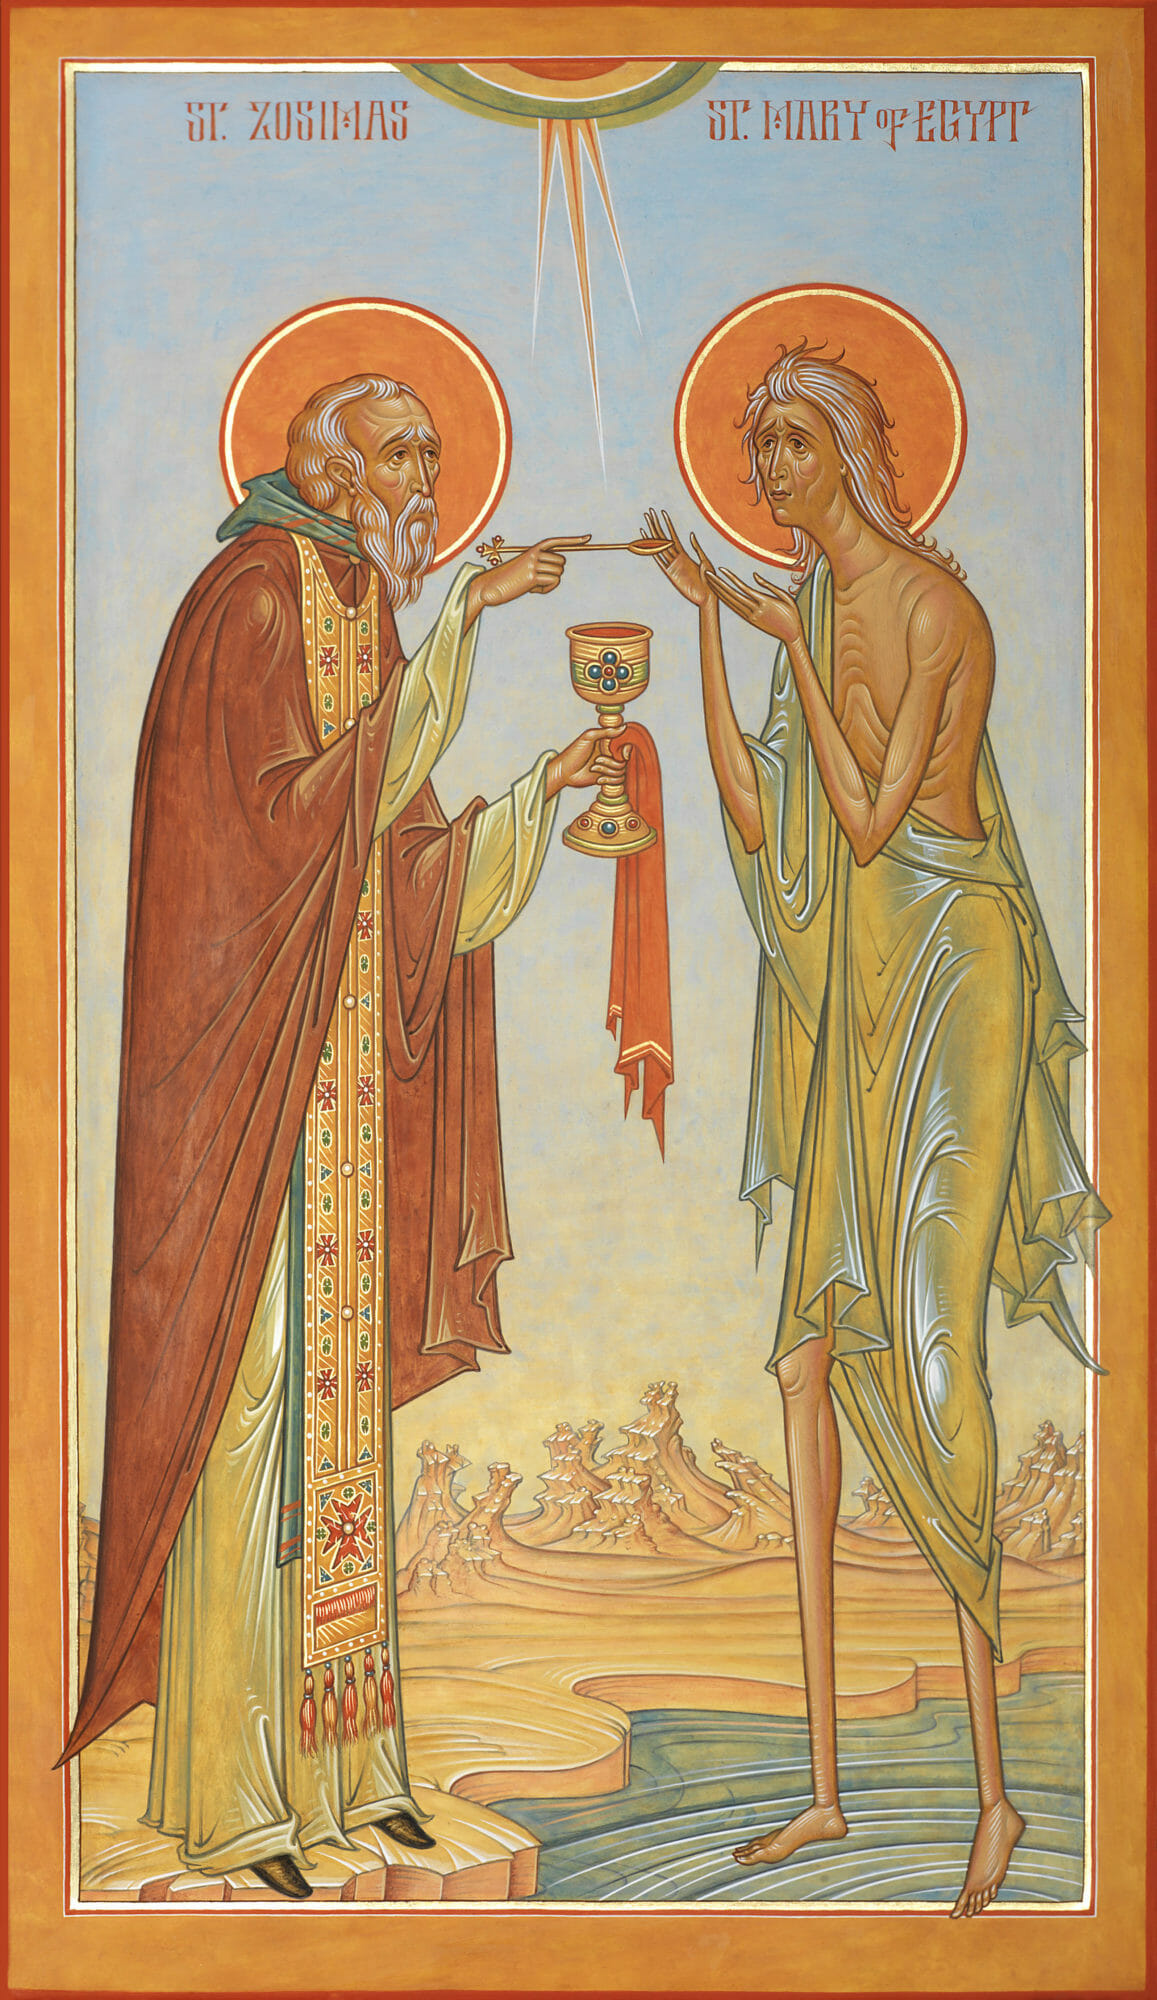 St. Mary of Egypt receiving the Holy Eucharist from St. Zosimas by Fr. Silouan Justiniano.  Egg tempera on wood, 10 7/8 in. x 19 in.